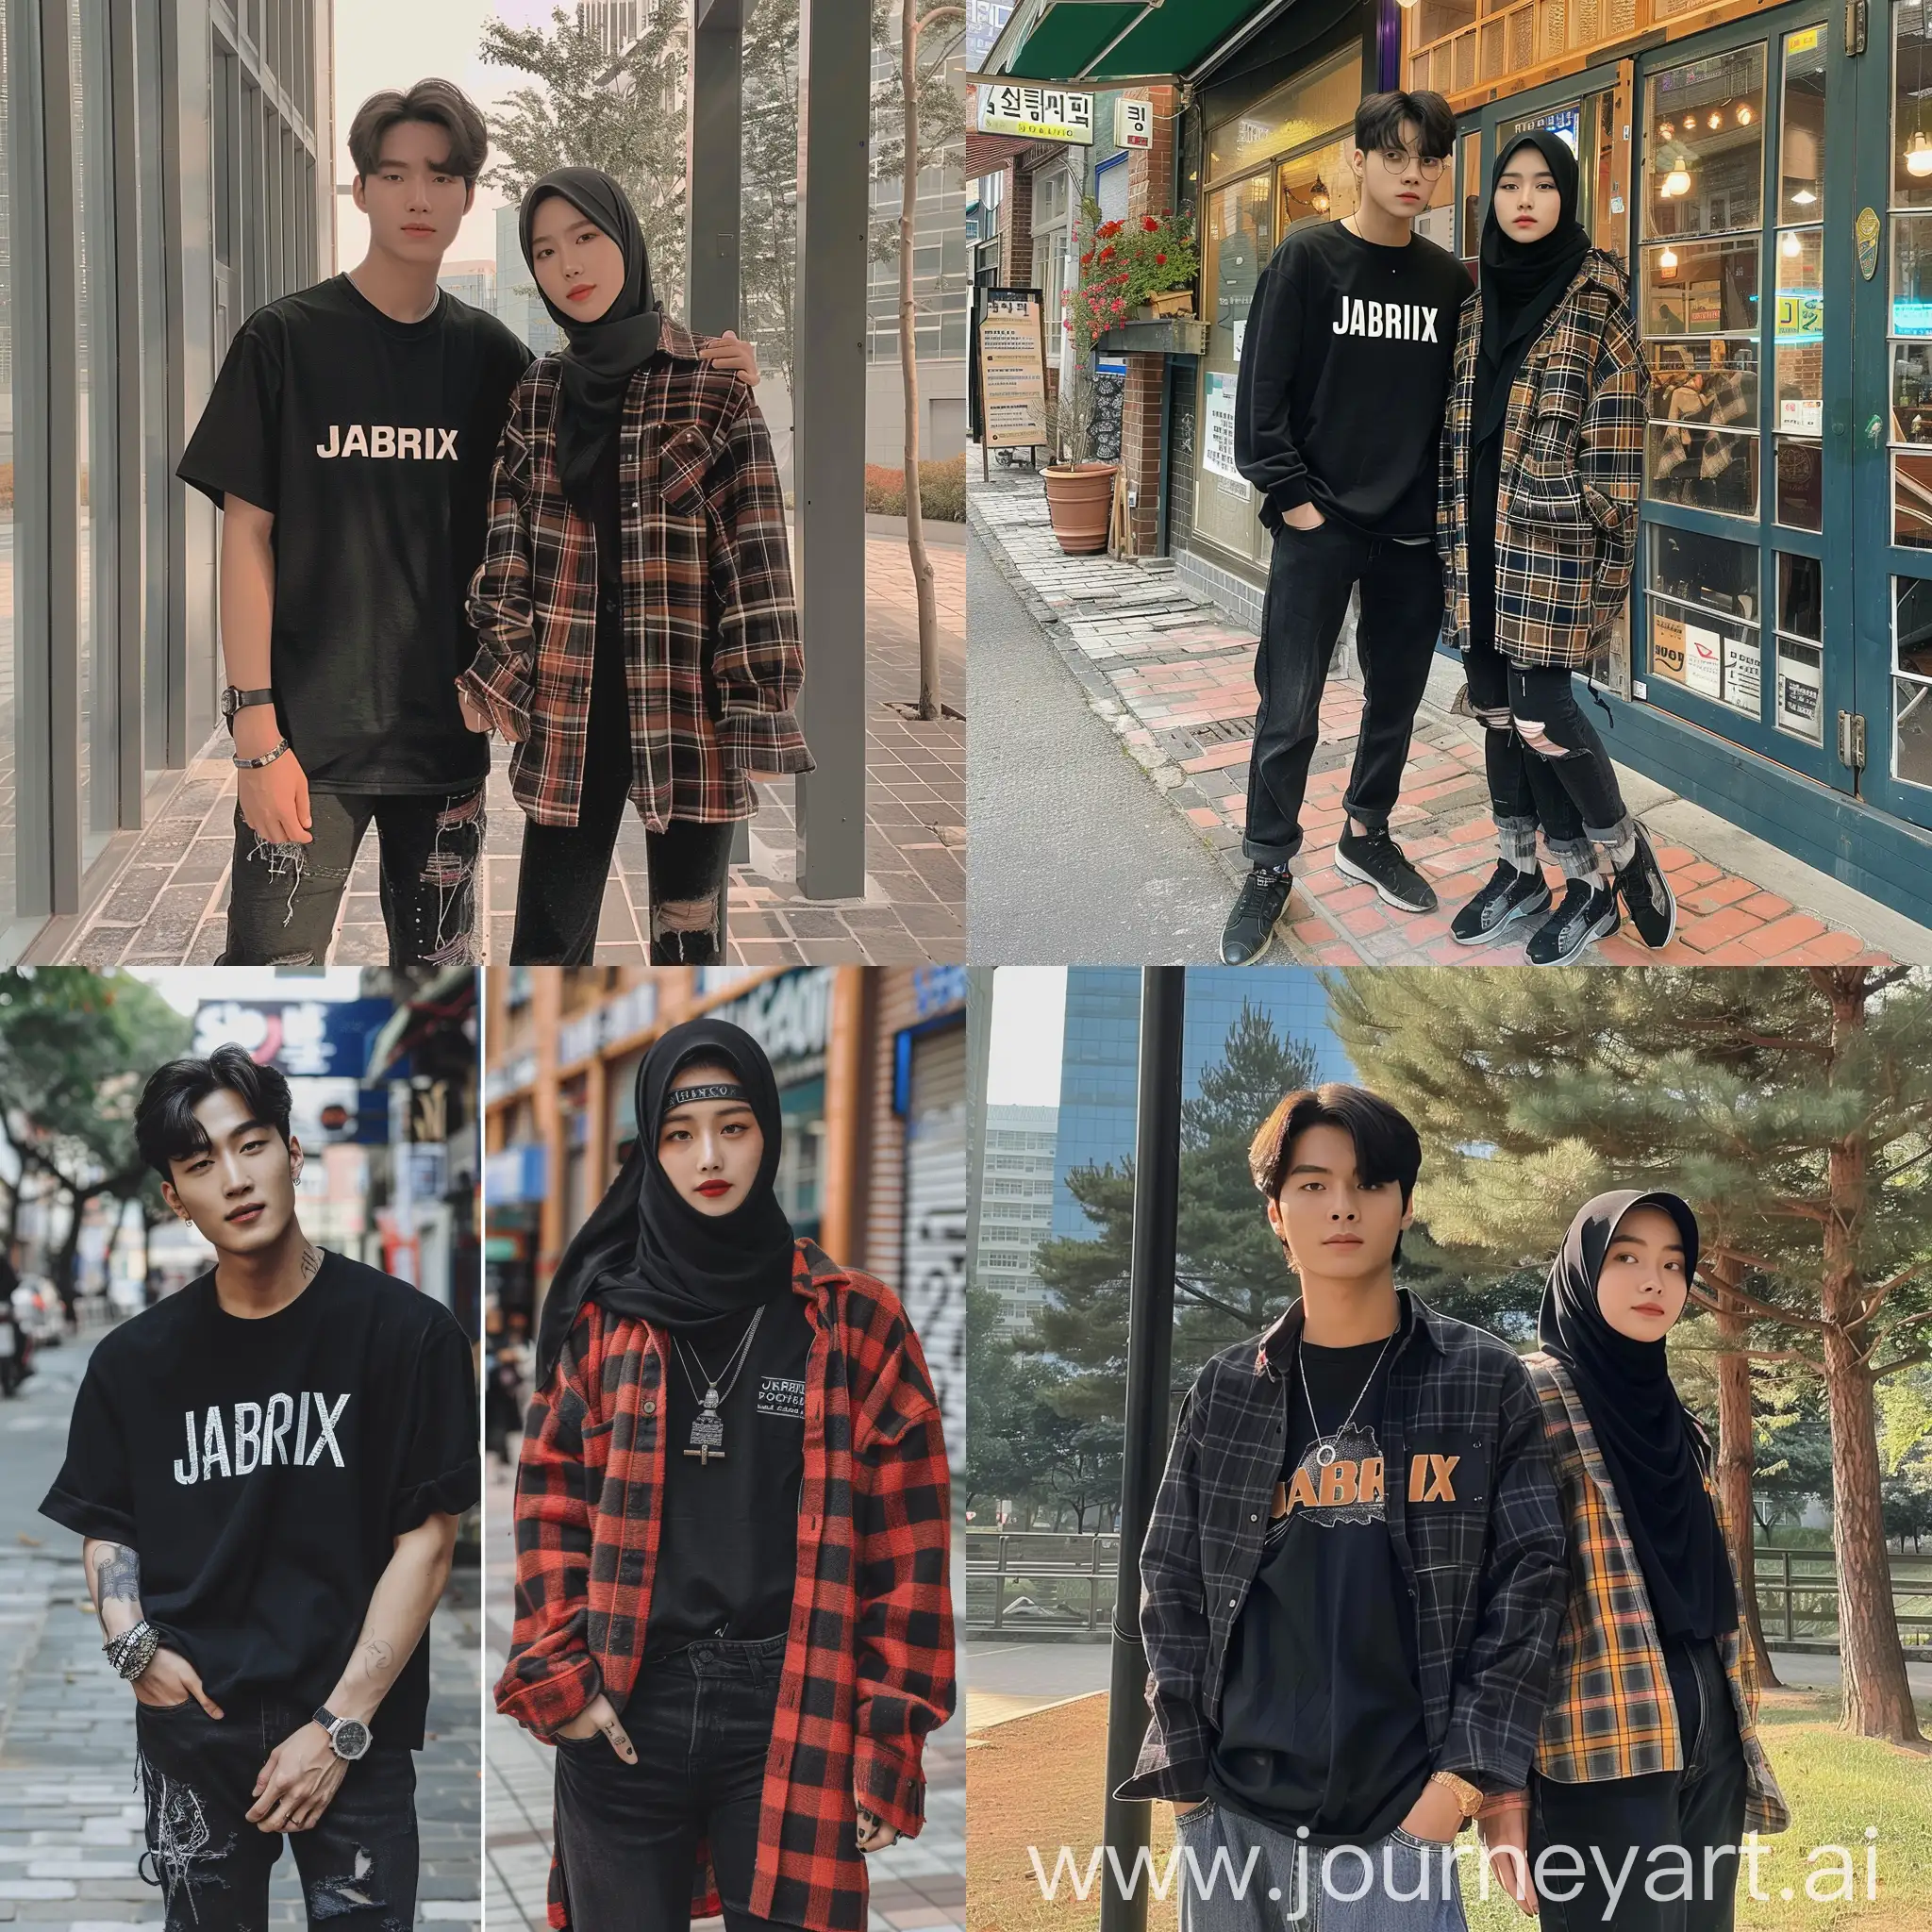 Korean-Man-and-Girl-in-Matching-JABRIX-Outfits-with-Hijab